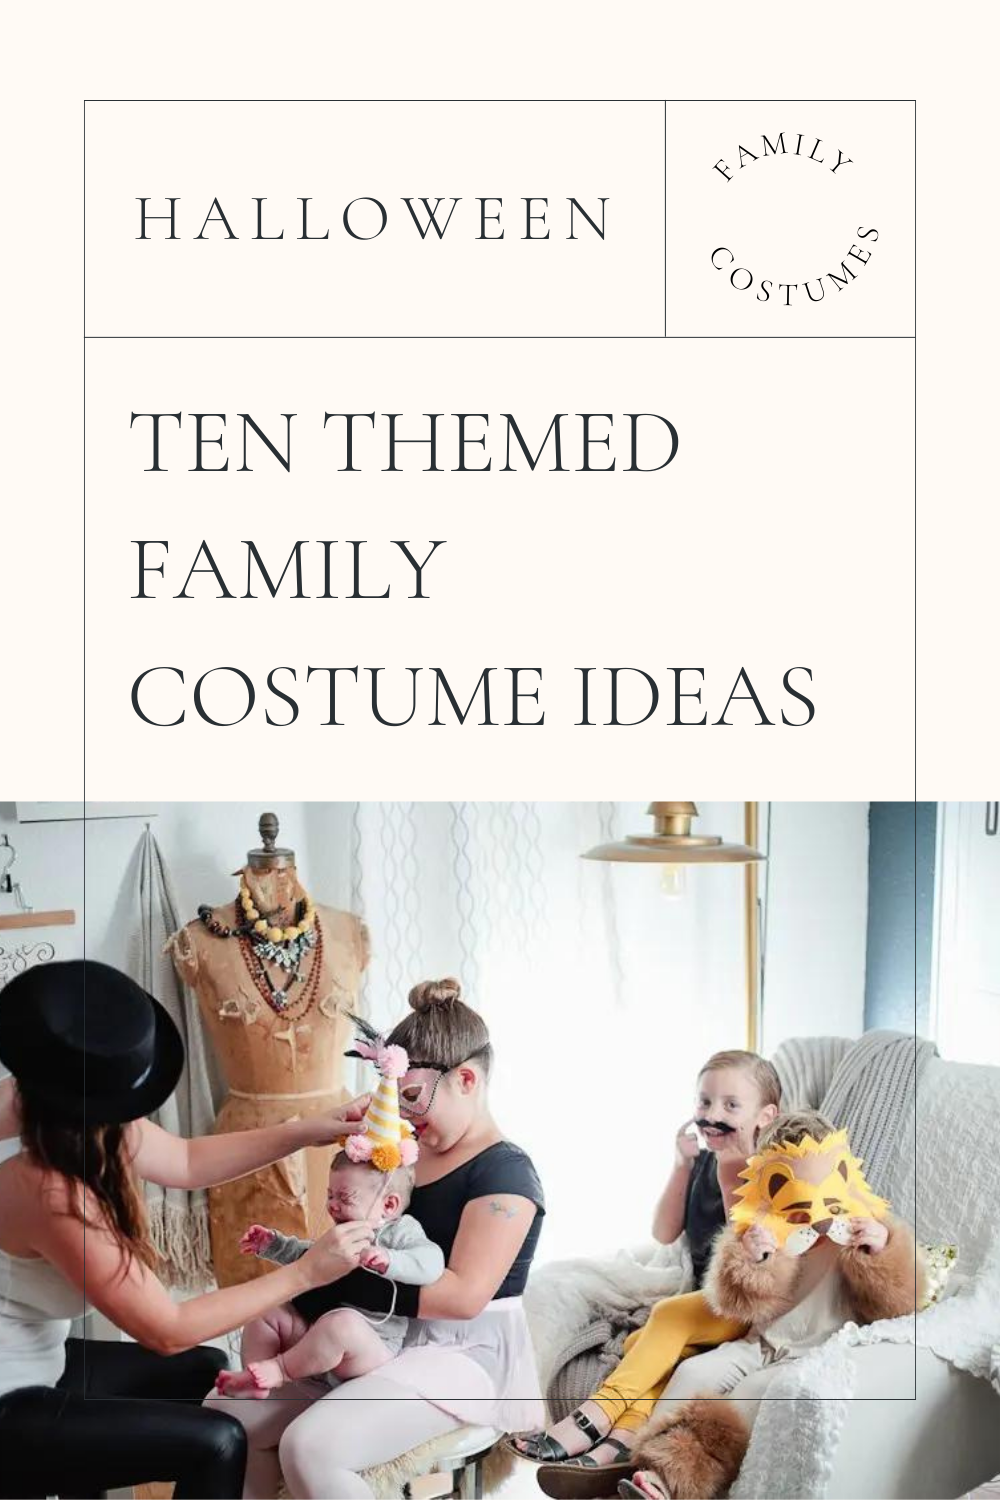 Ten Themed Family Costume Ideas perfect for Halloween